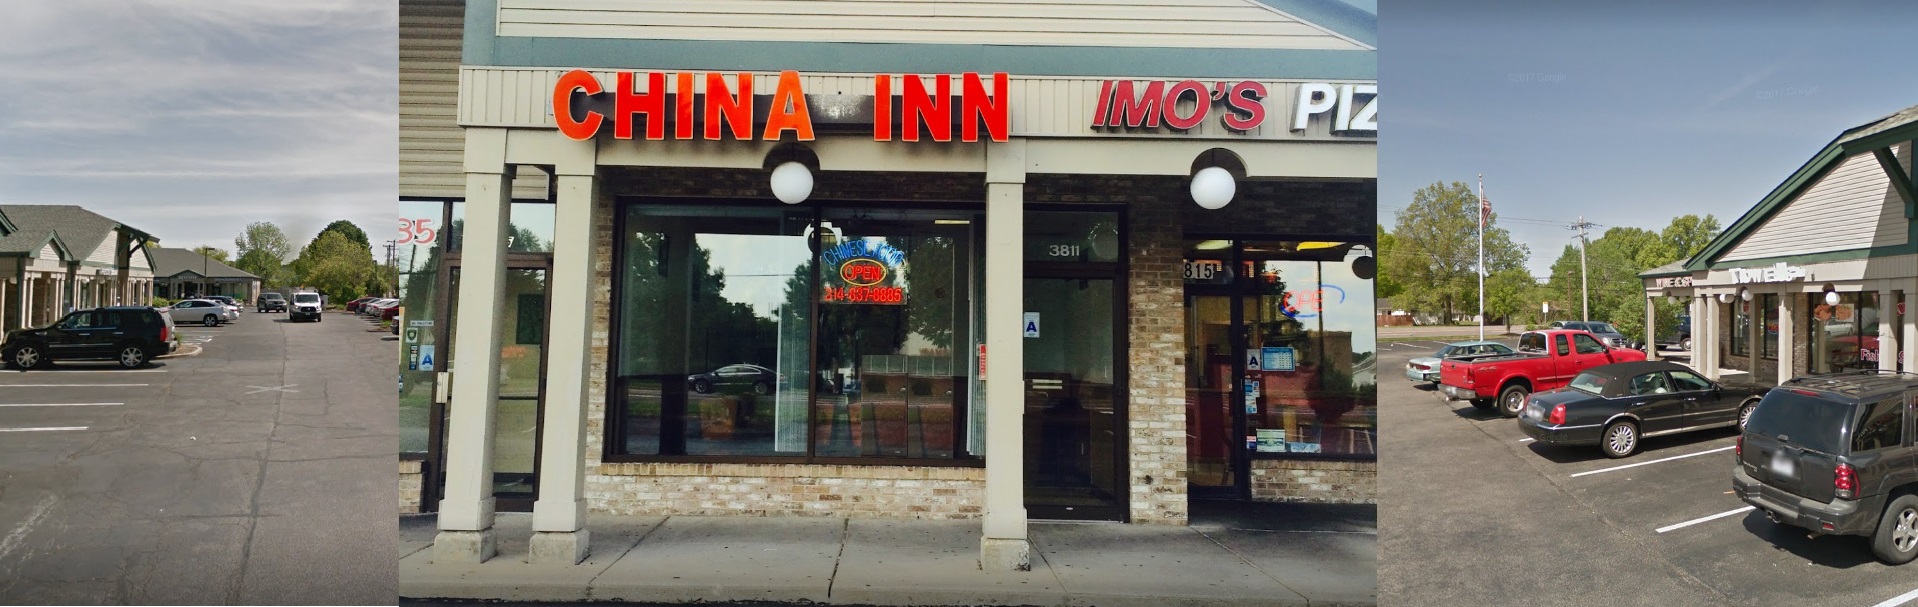 Your favorite Chinese food at China Inn Restaurant Chinese